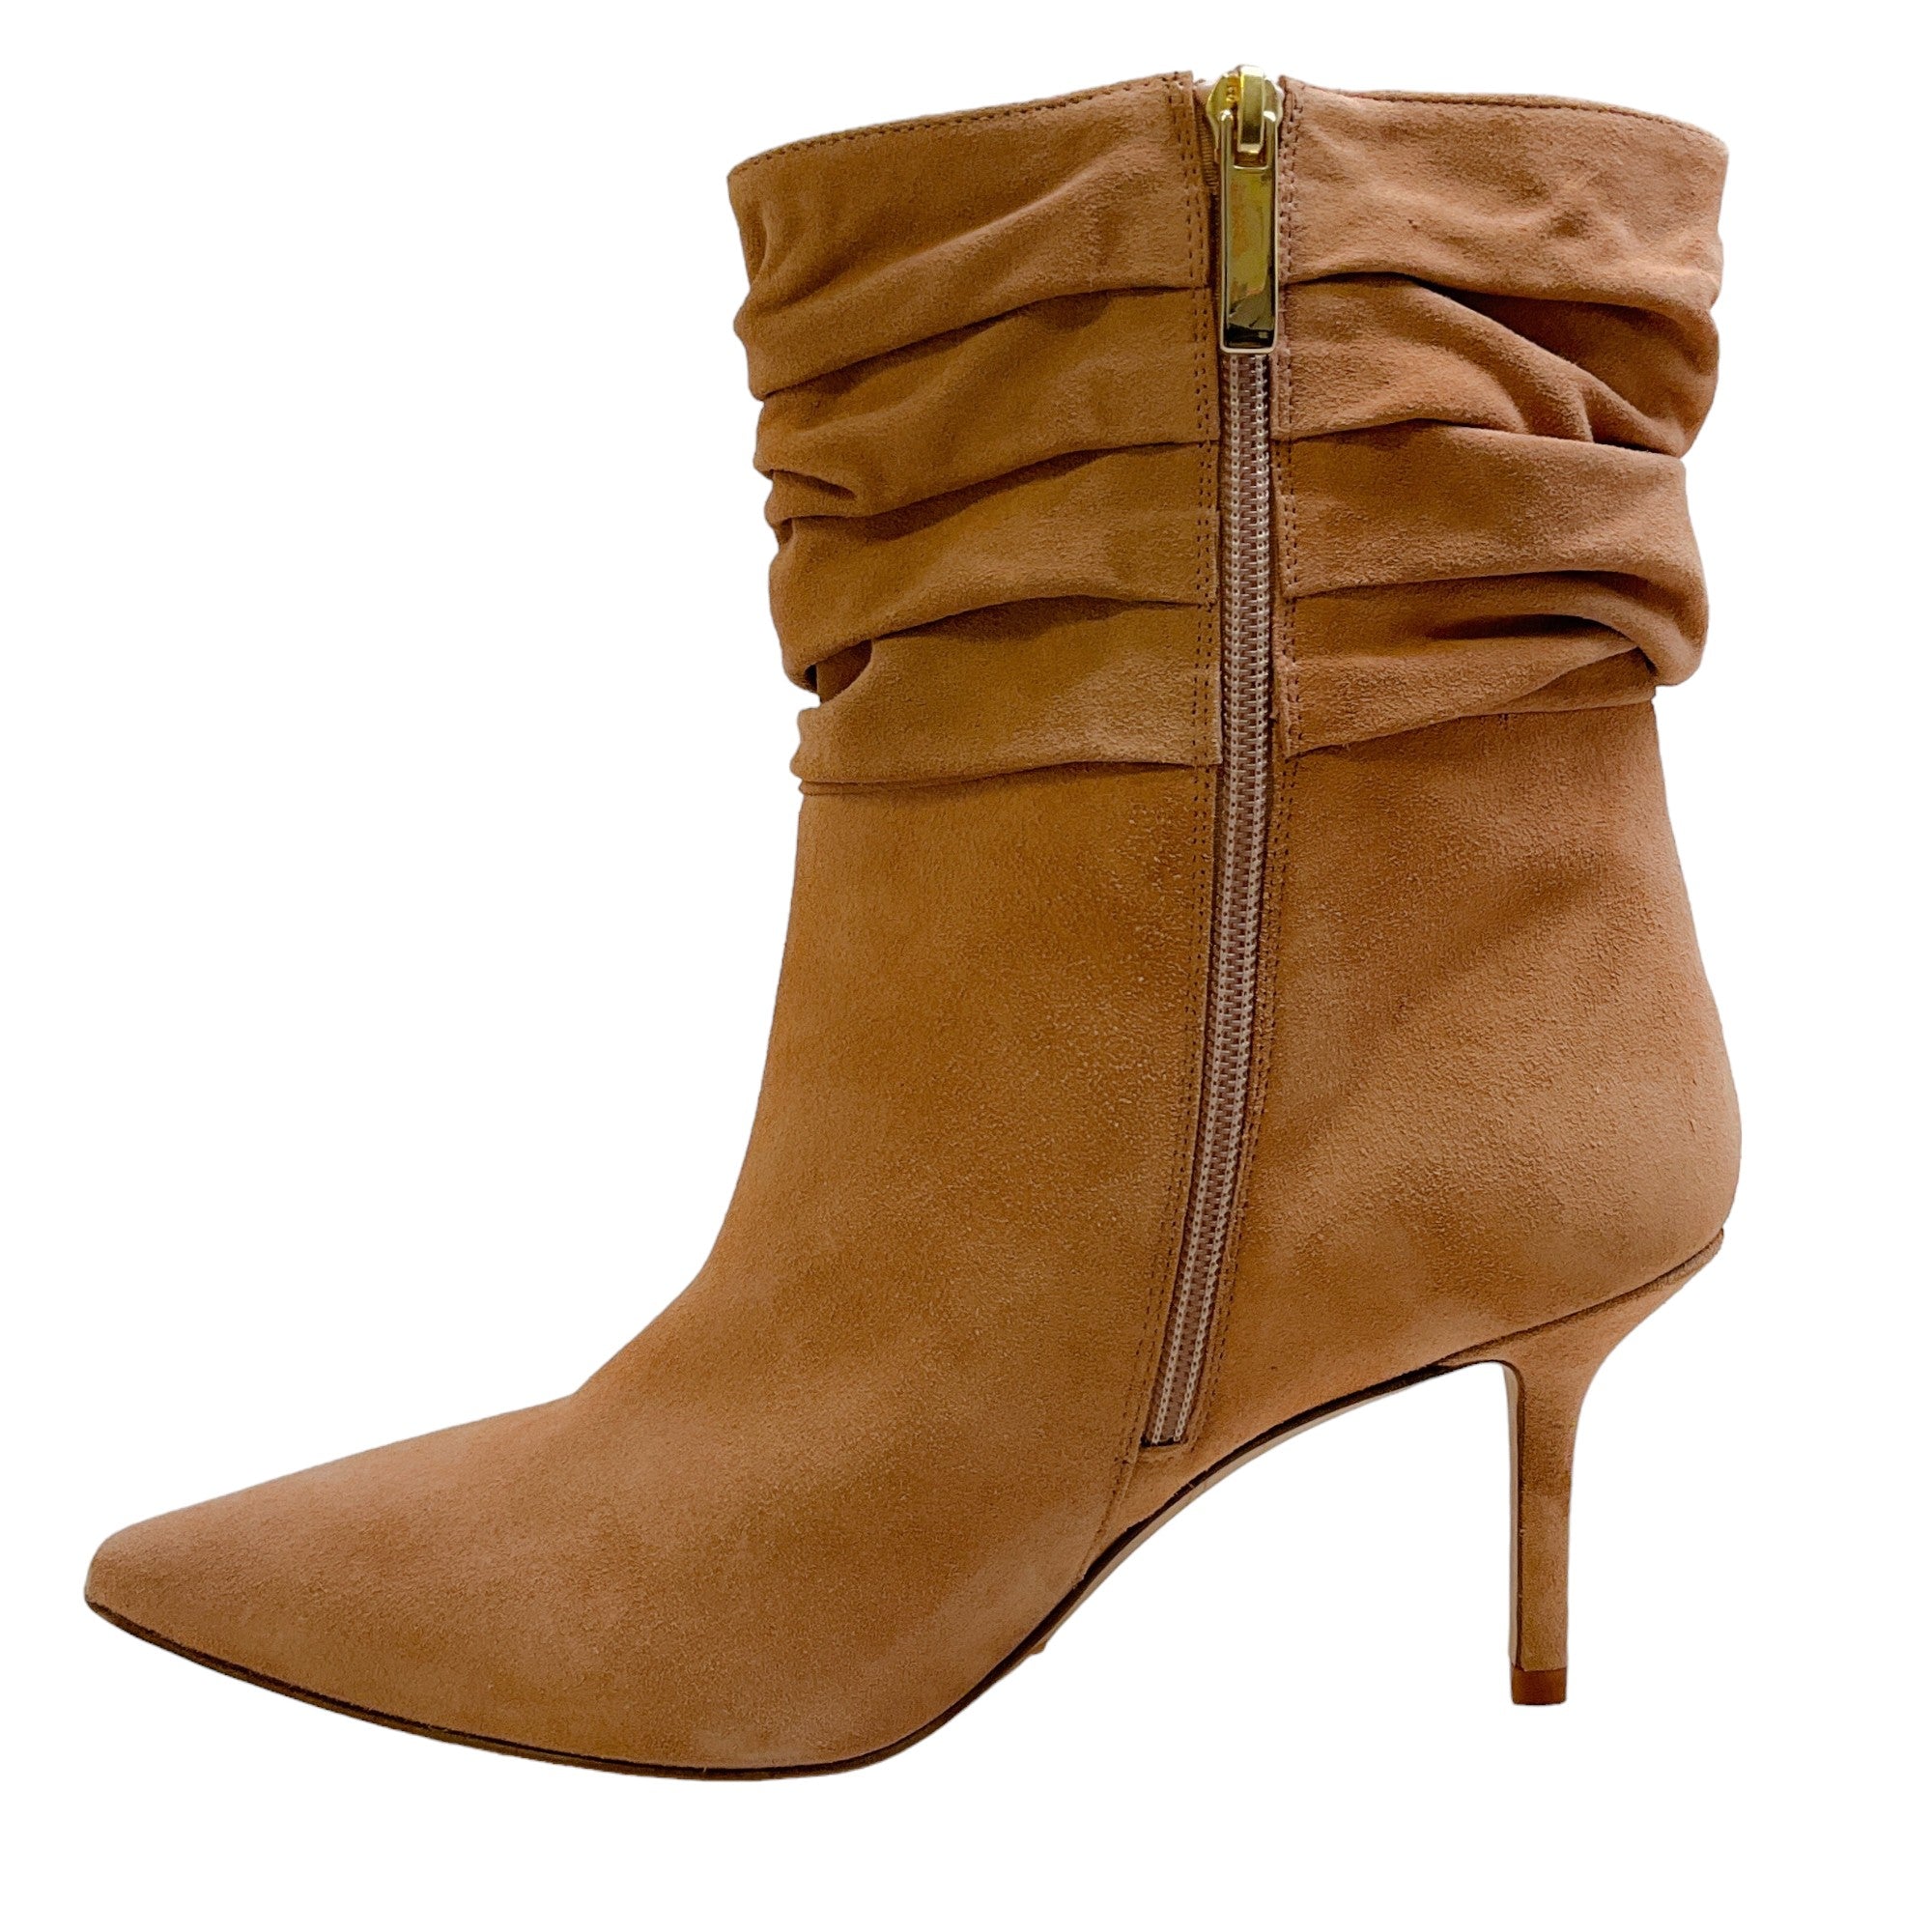 L'Agence Beige Suede Florine Slouch Booties